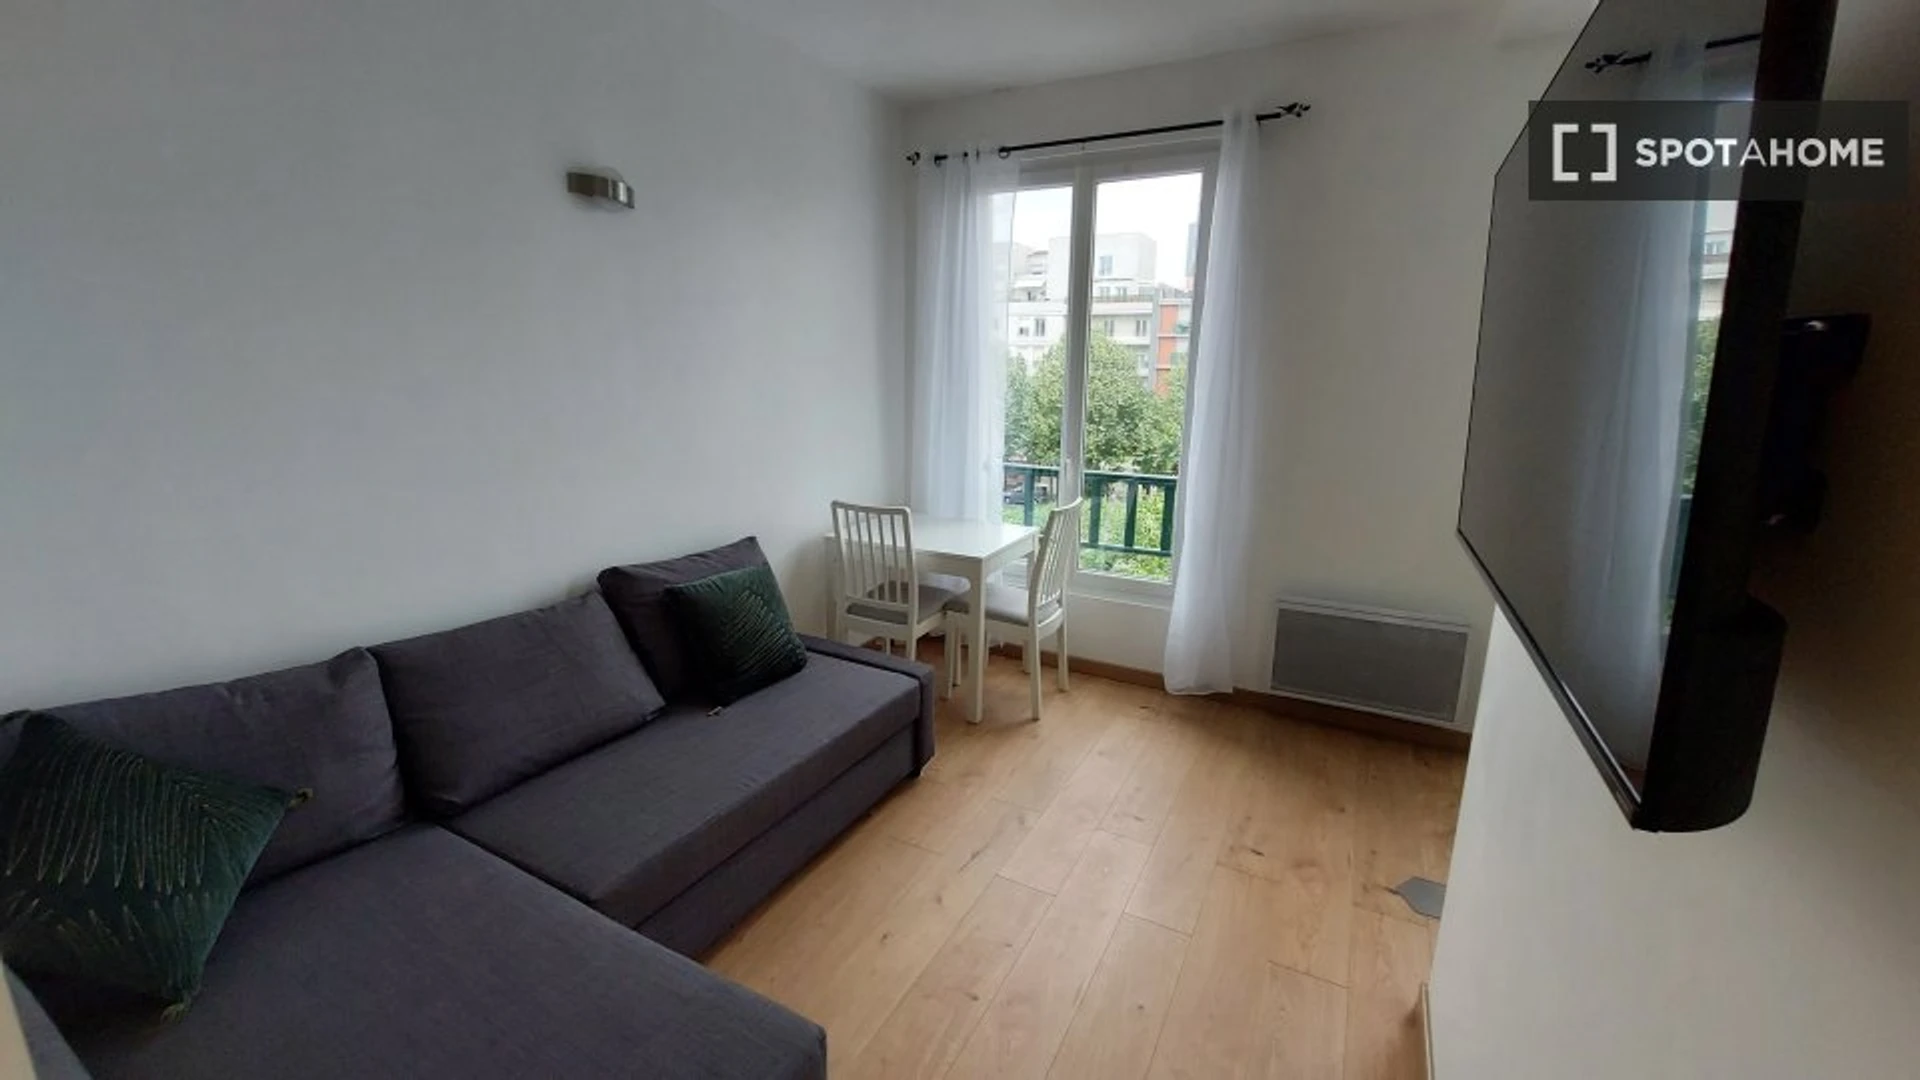 Entire fully furnished flat in Saint-denis